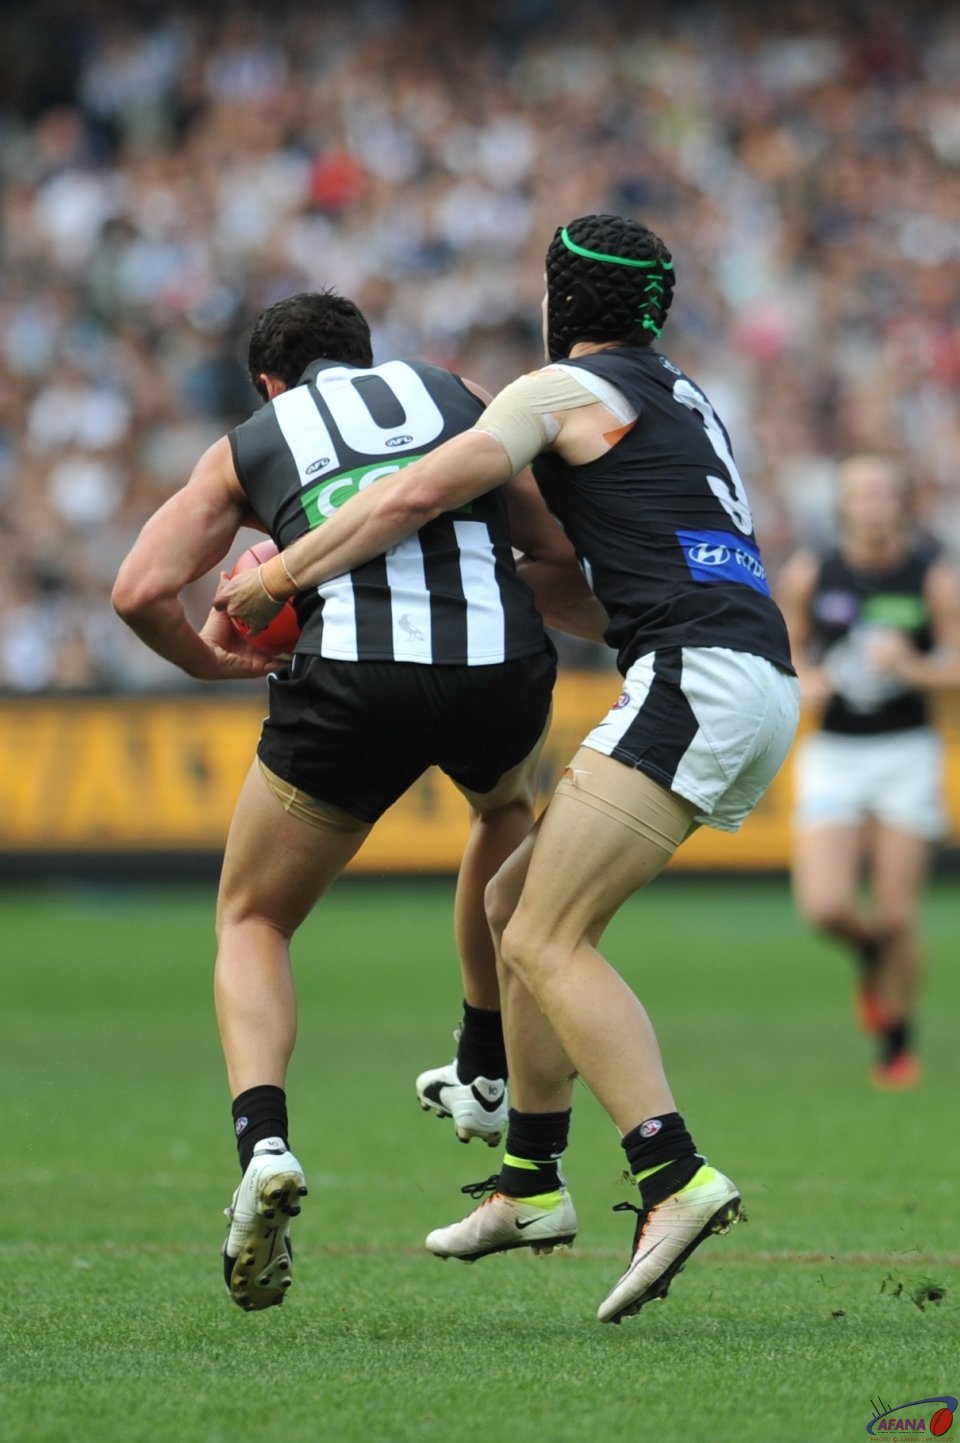 Captain on Captain Murphy tackles Pendlebury